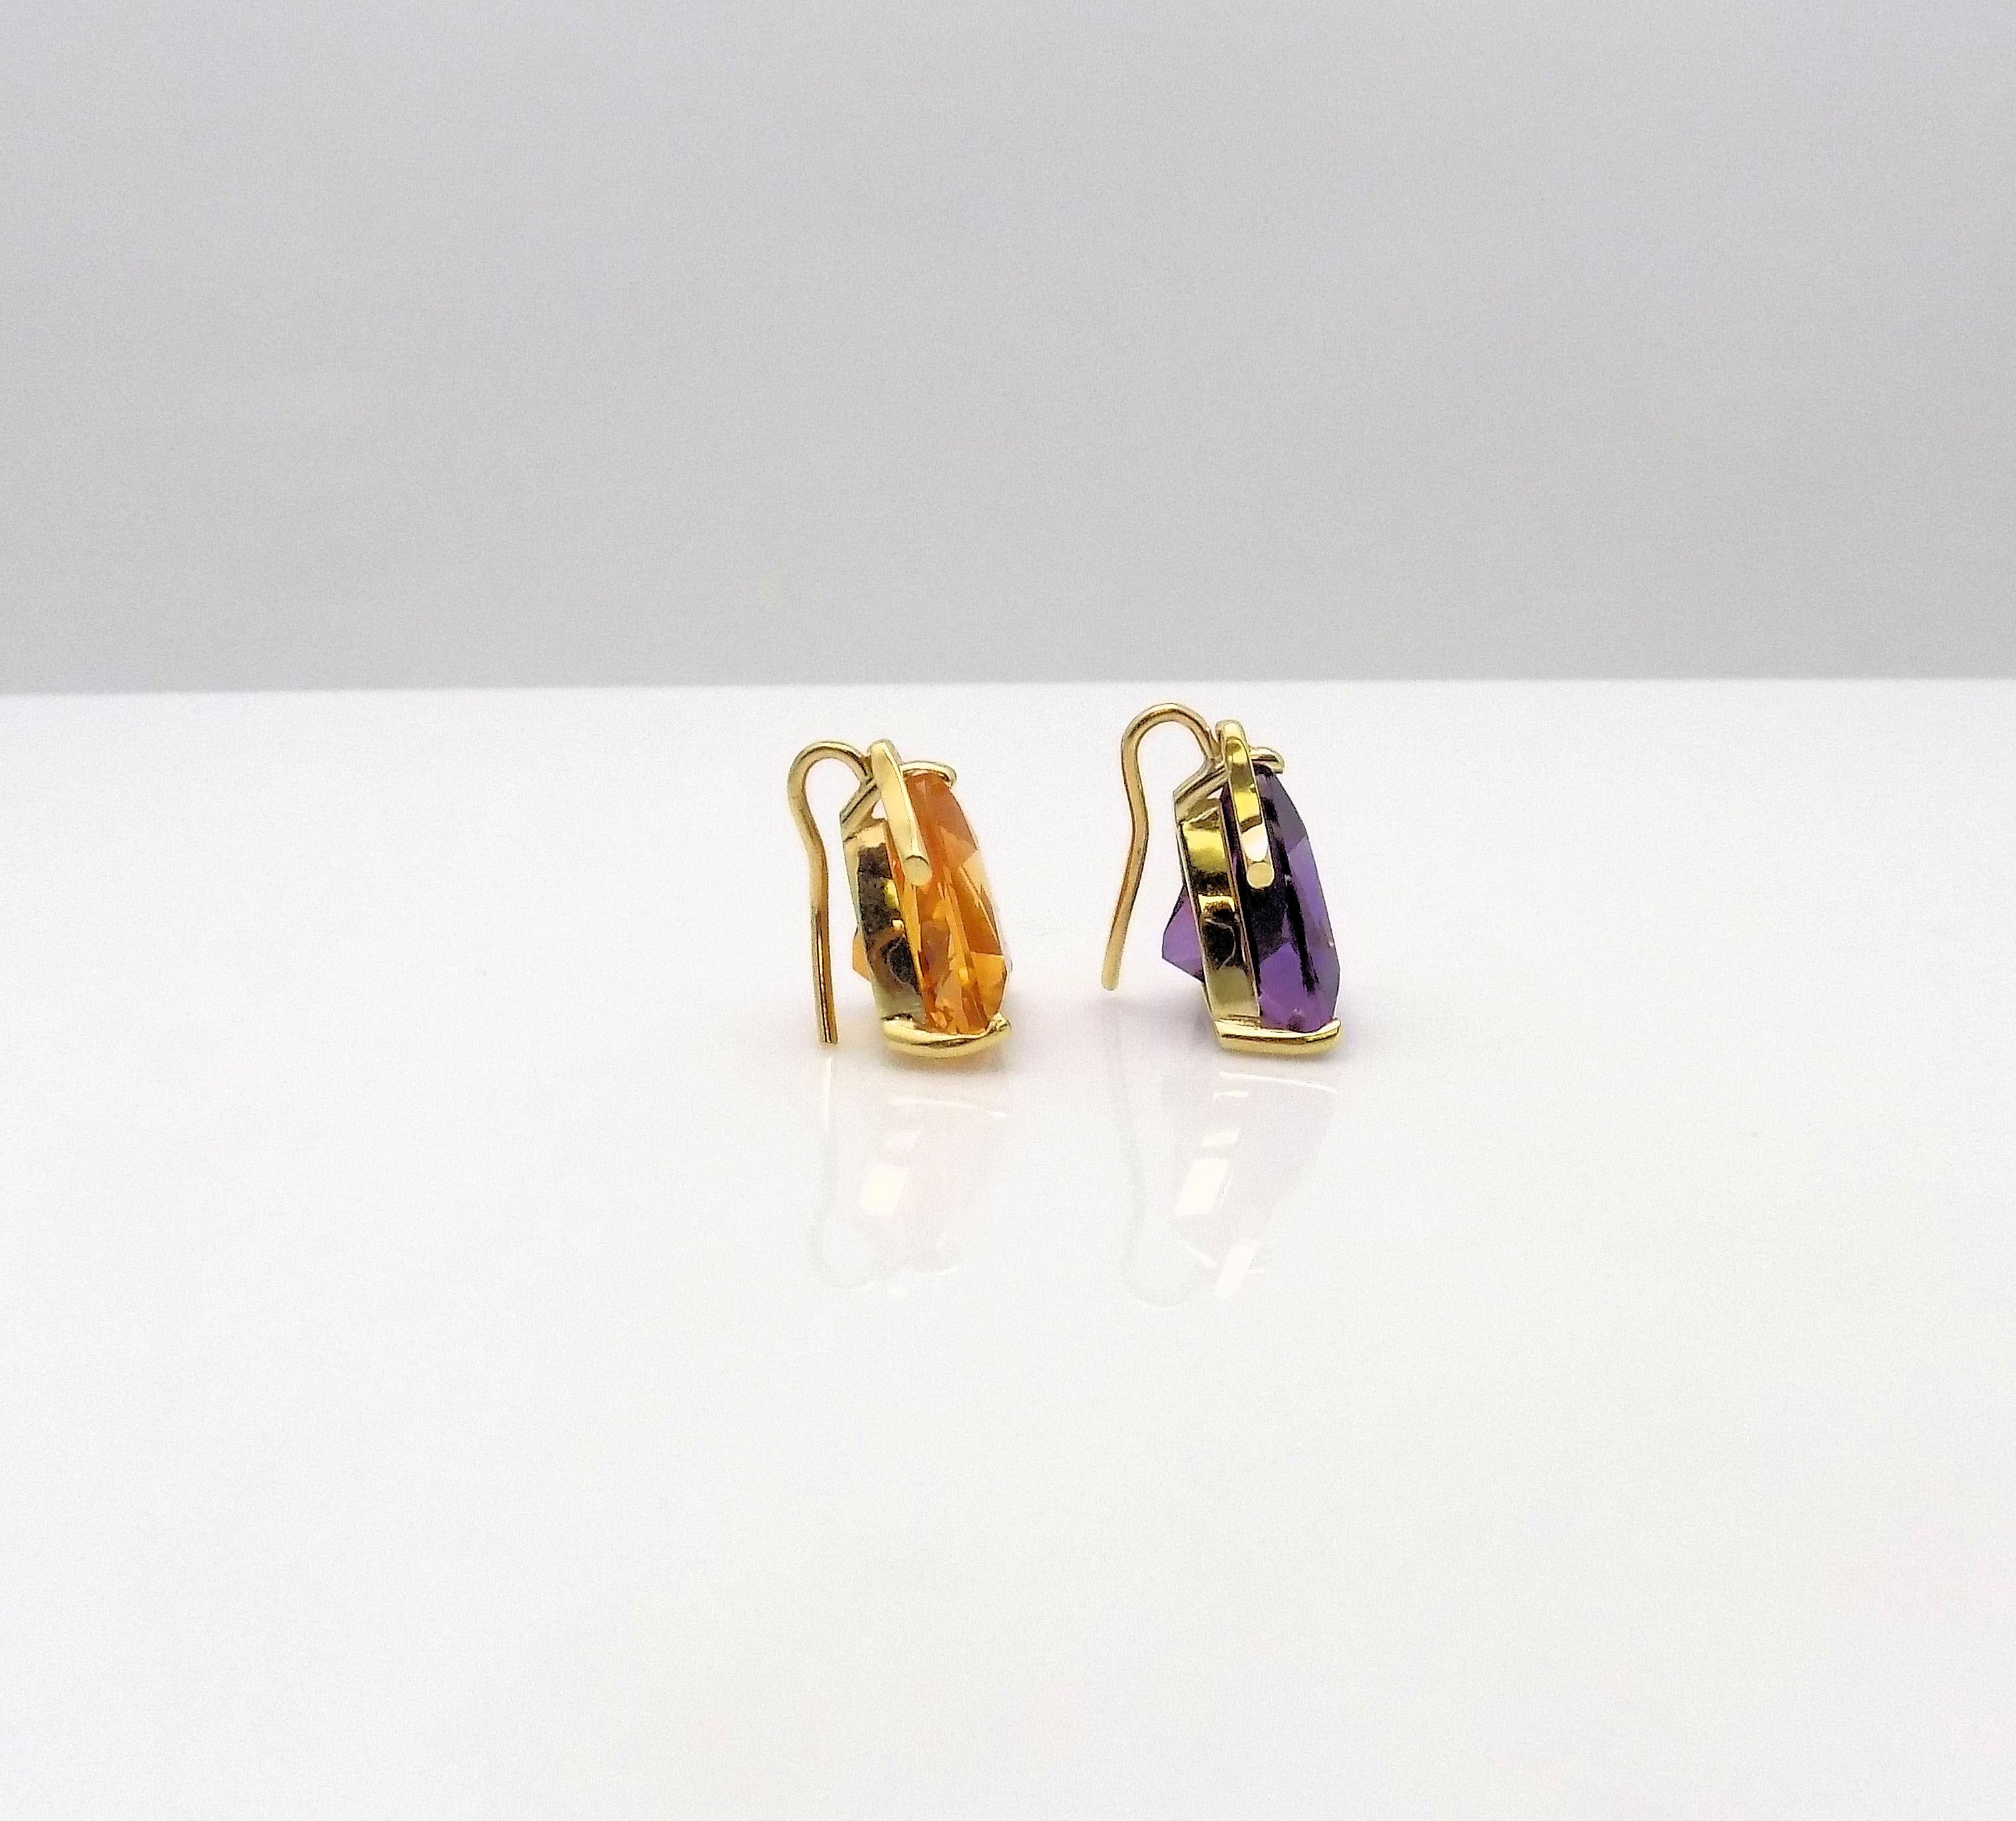 Dramatic Addition to Your Earrings (to be worn with earring tops)...18 Karat Yellow Gold Pair Earring Enhancers/Drops with Shepherd's Hook, Featuring 1 Pear Shape Amethyst; 1 Pear Shape Citrine Weighing 26.00 Carat Total Weight; Chip on Culet of